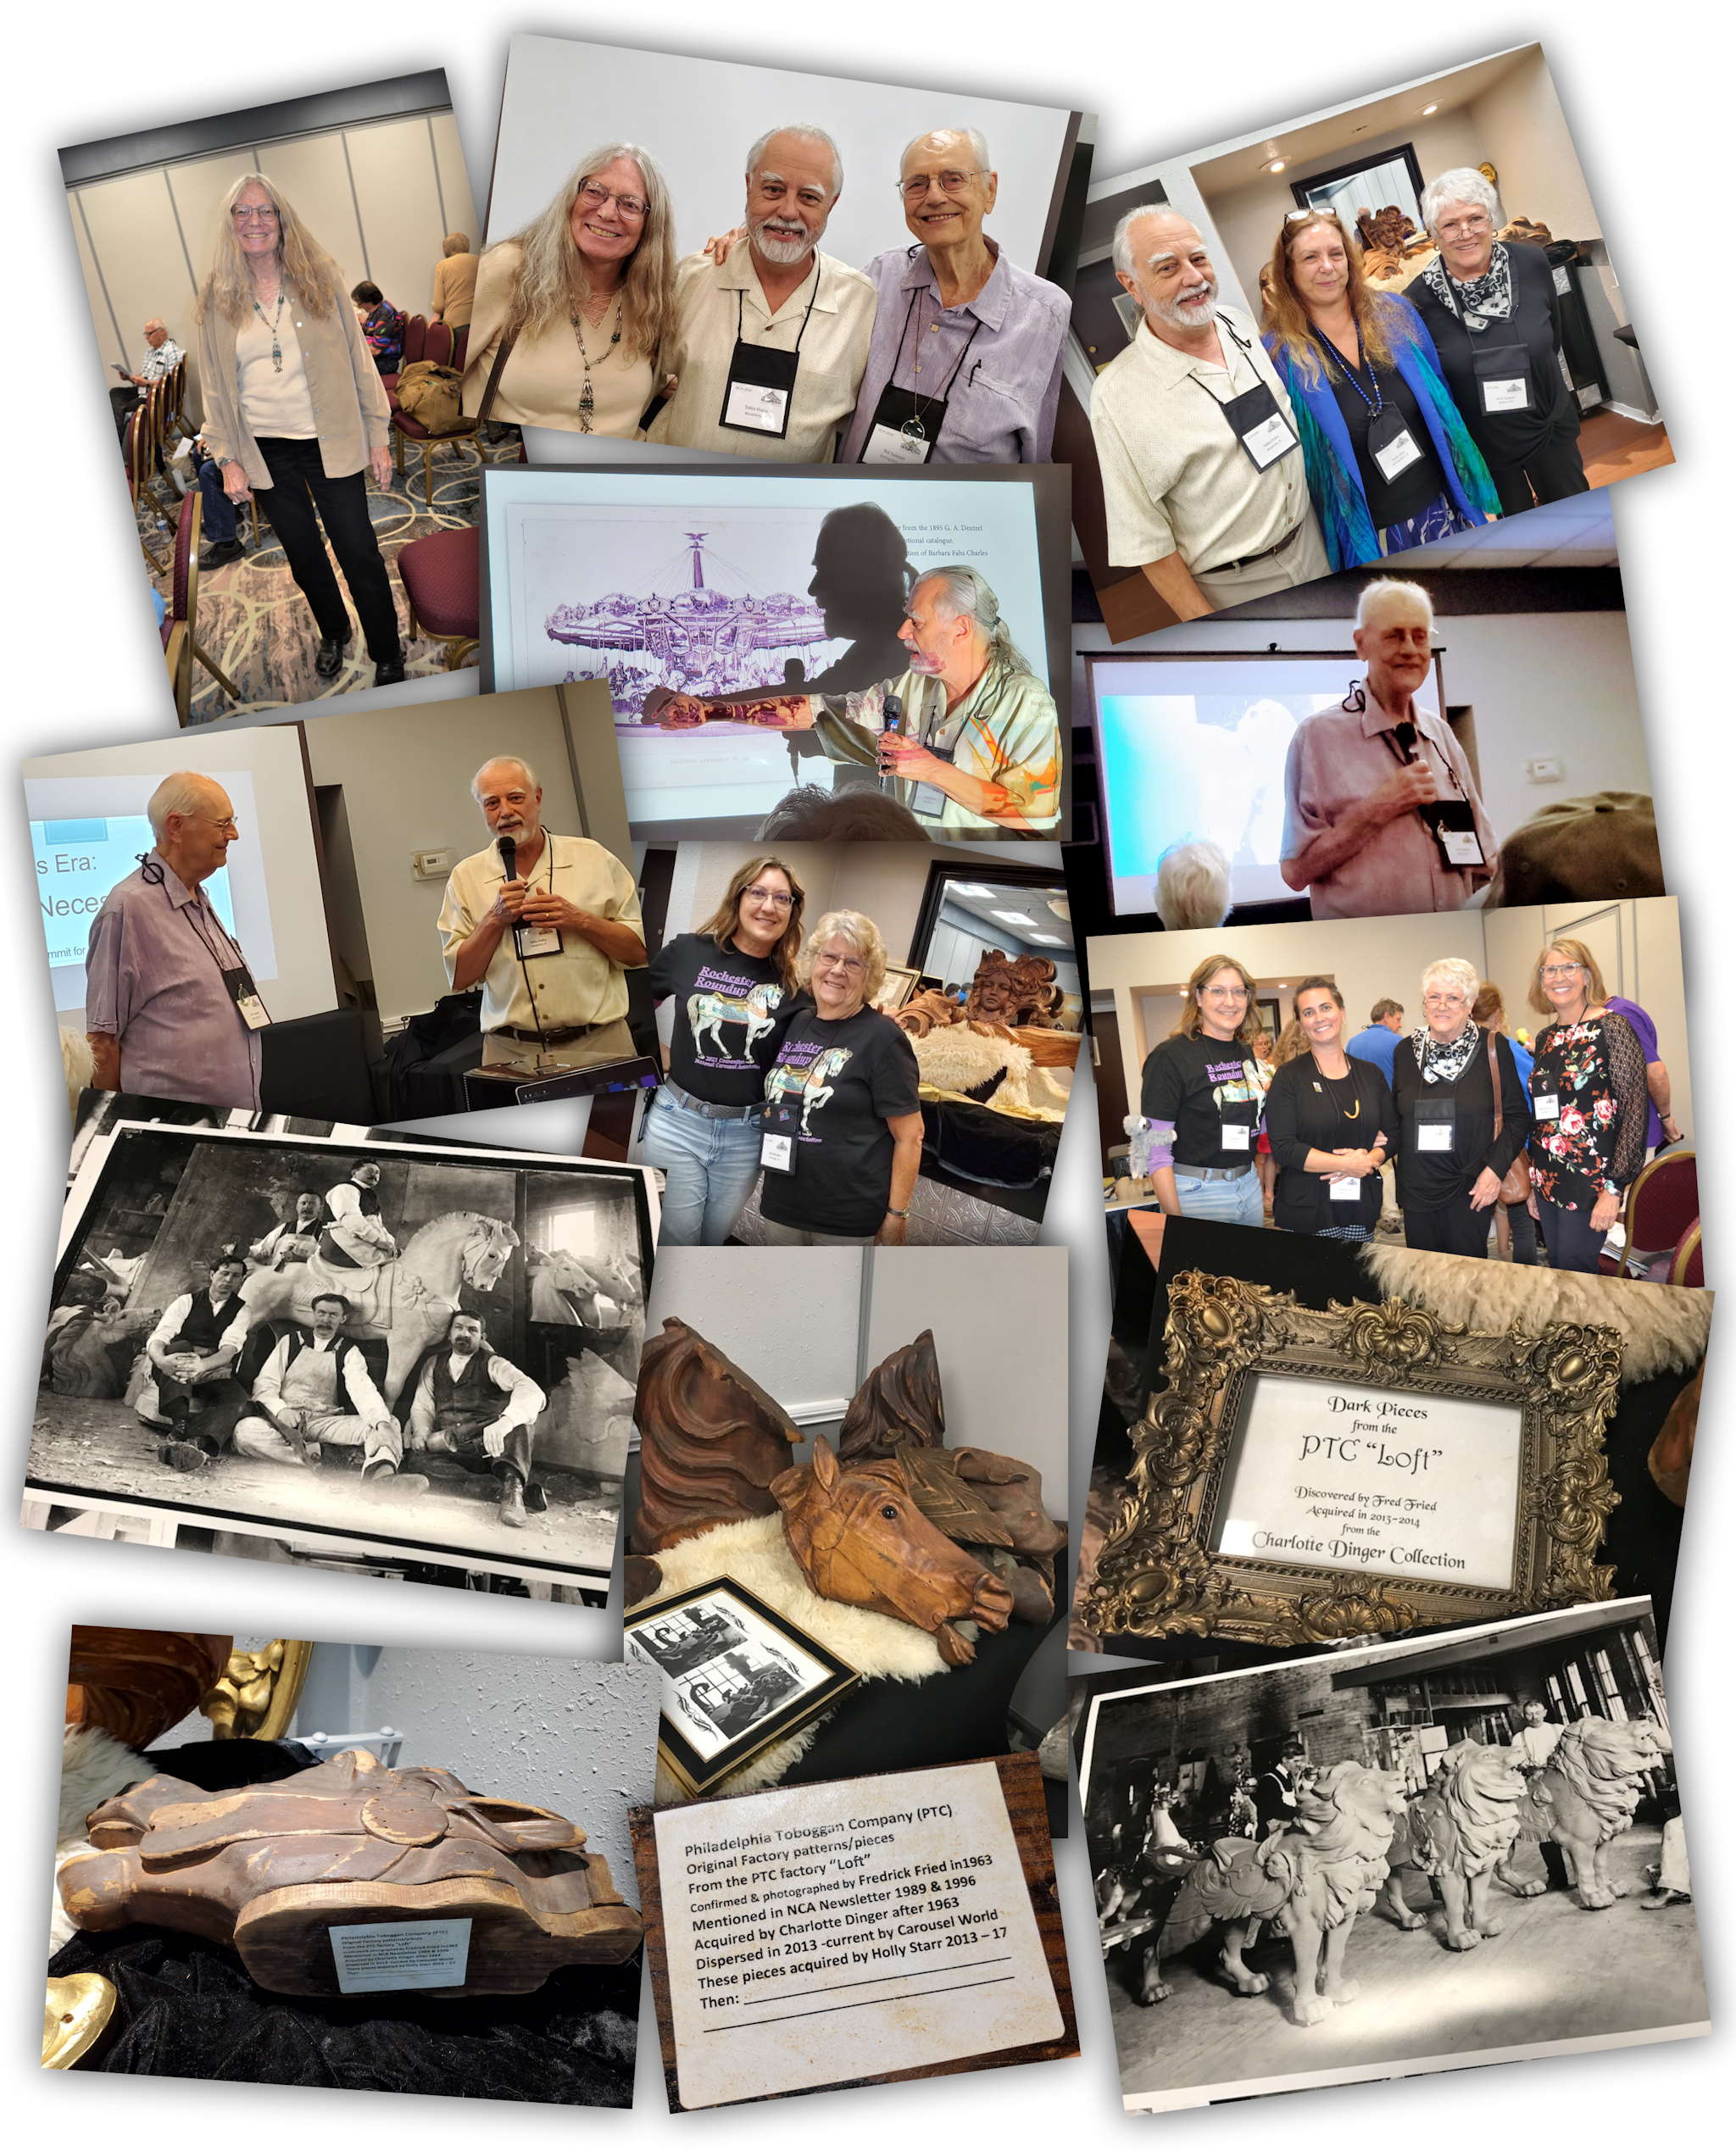 2022 Convention - NCA History Day